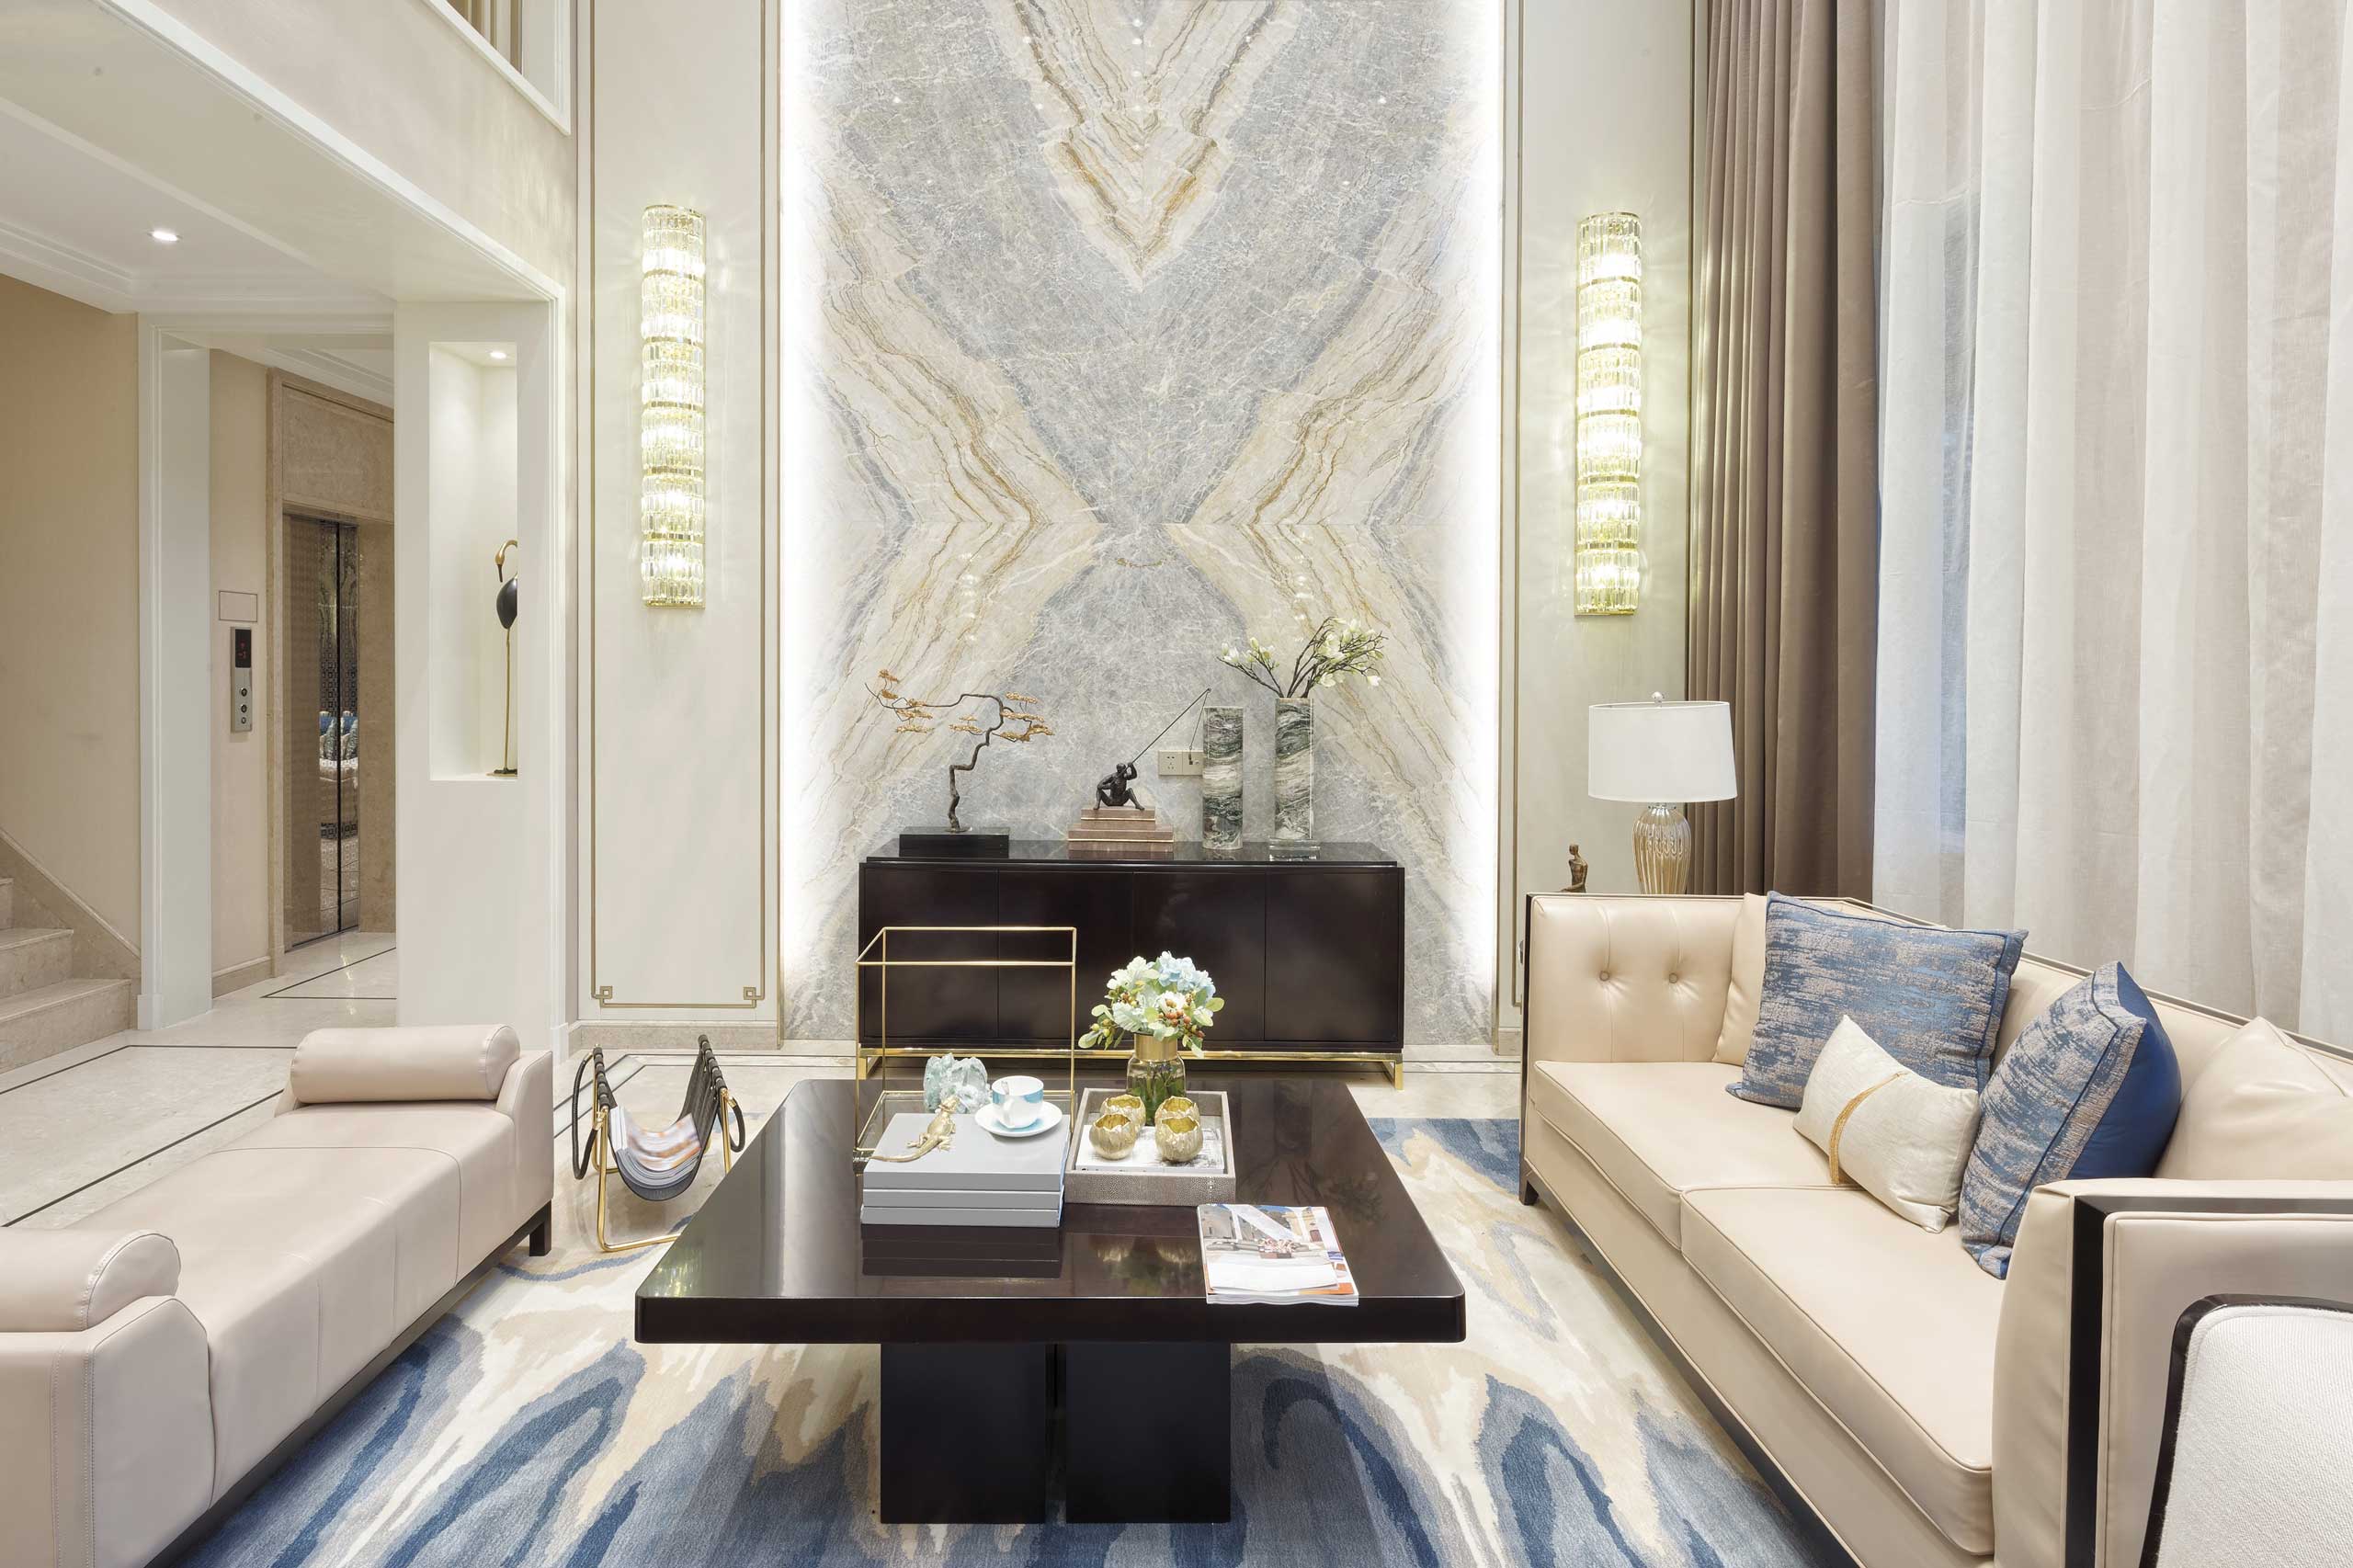 Ultra modern reception area | Contemporary home in the middle east | Utec 1921 sourcing advisors